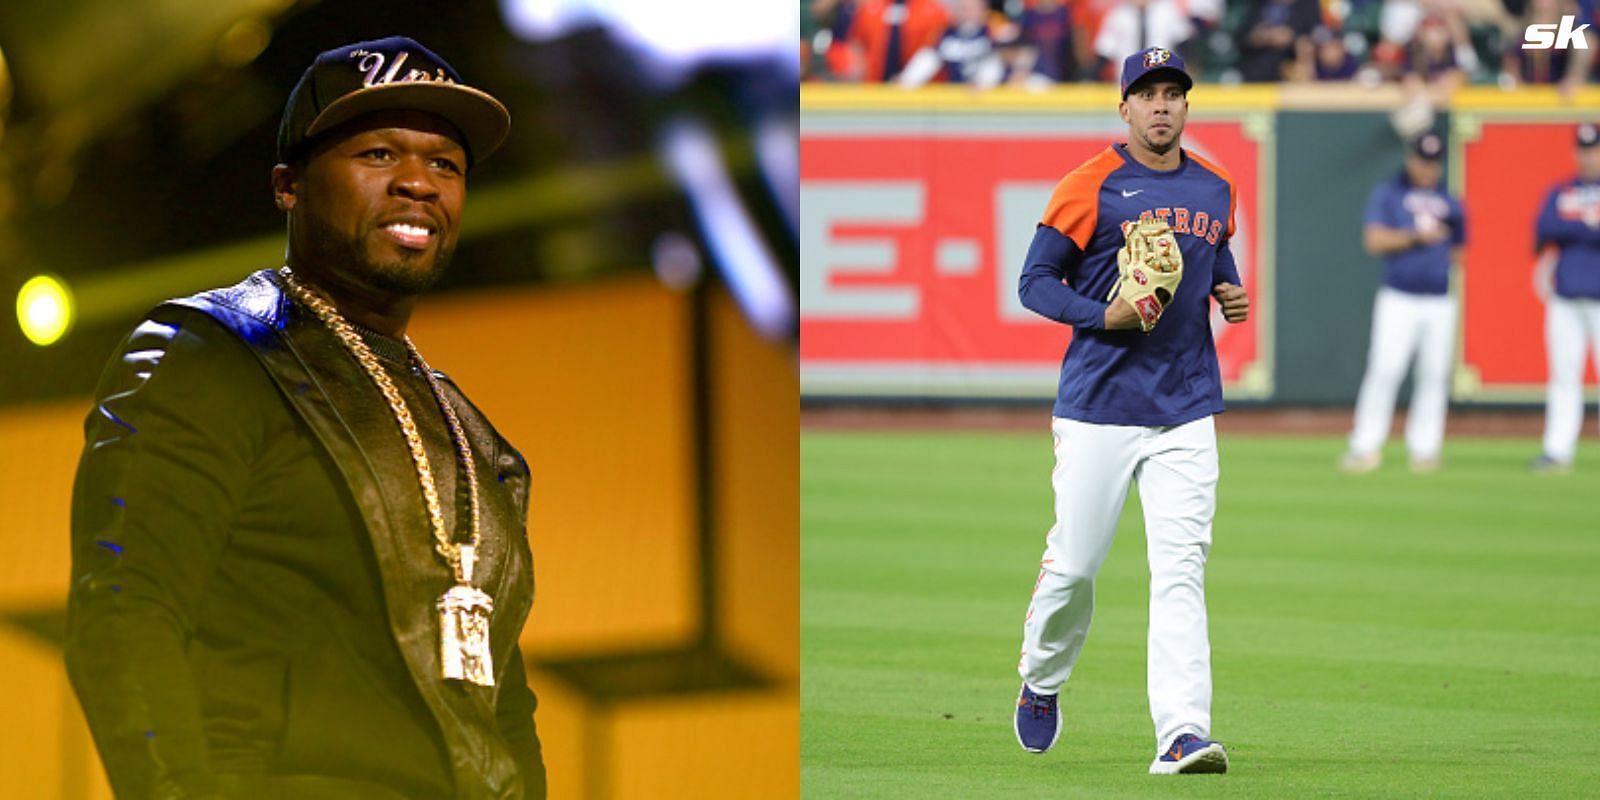 U.S. rapper 50 Cent &amp; 5x MLB All-Star Michael Brantley were special guest performers during the Astros